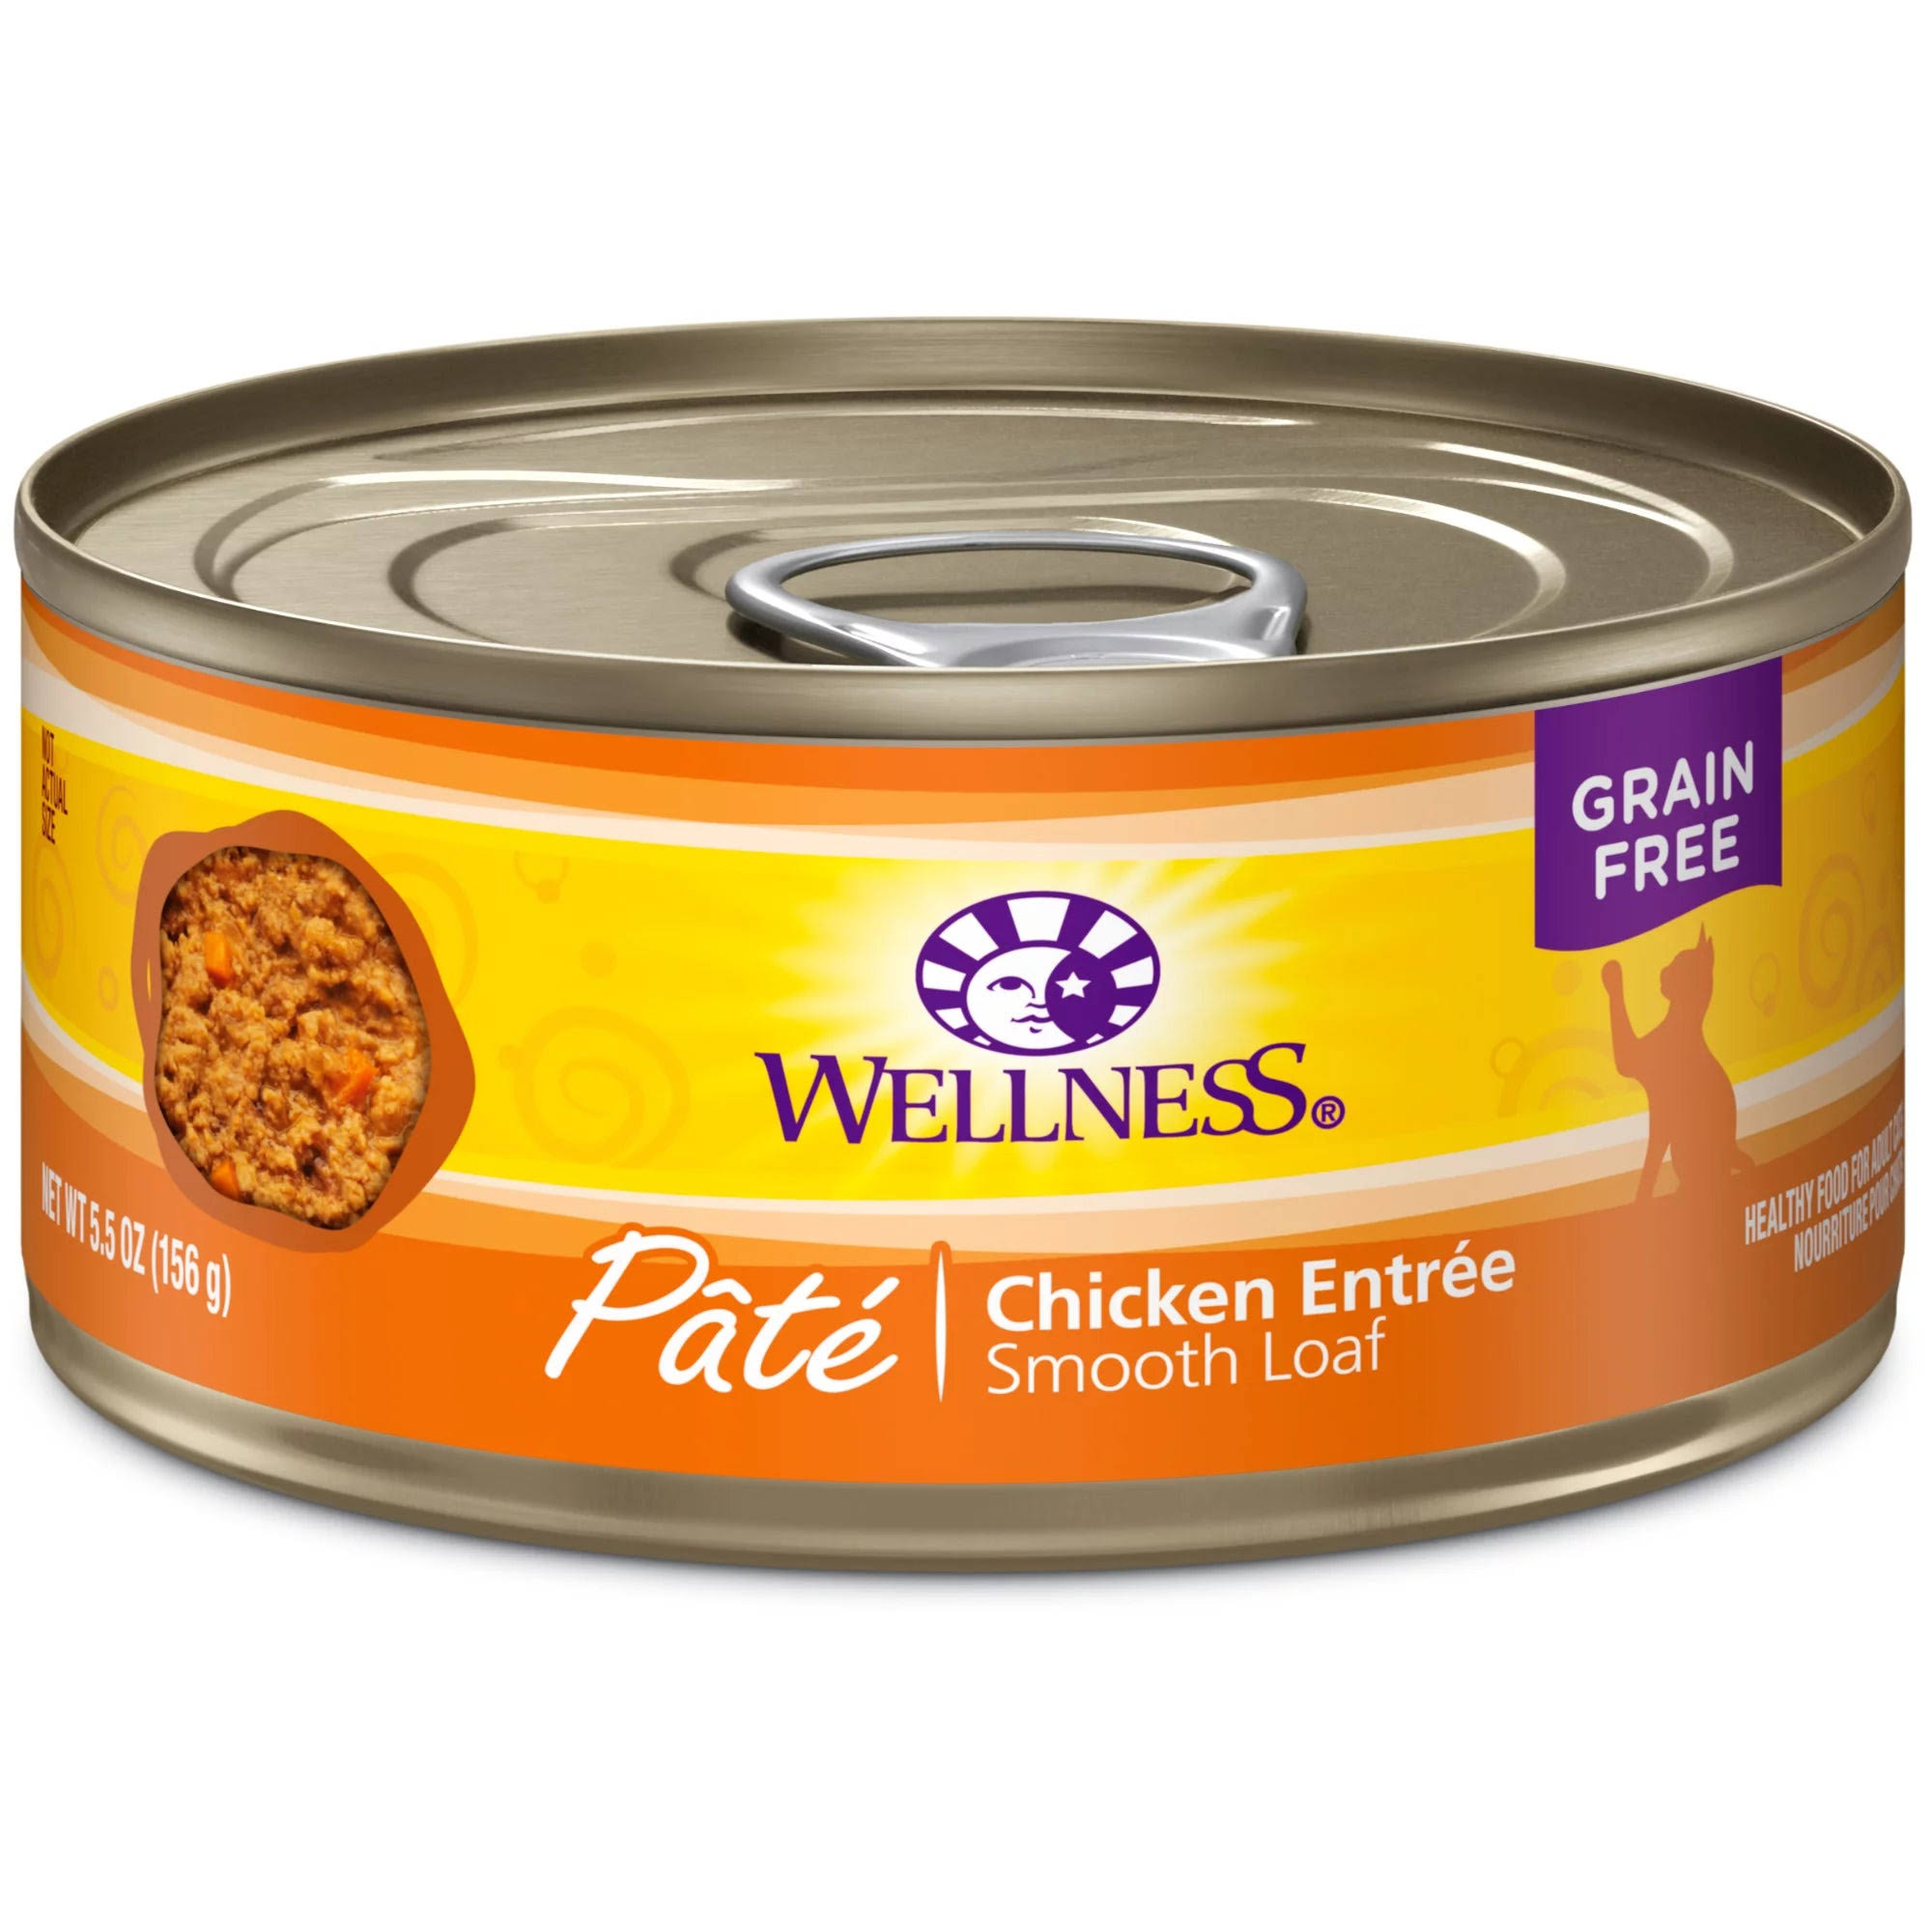 Wellness Complete Health, Wet Cat Food Variety Pack - Pate Size: 12 ct | PetSmart